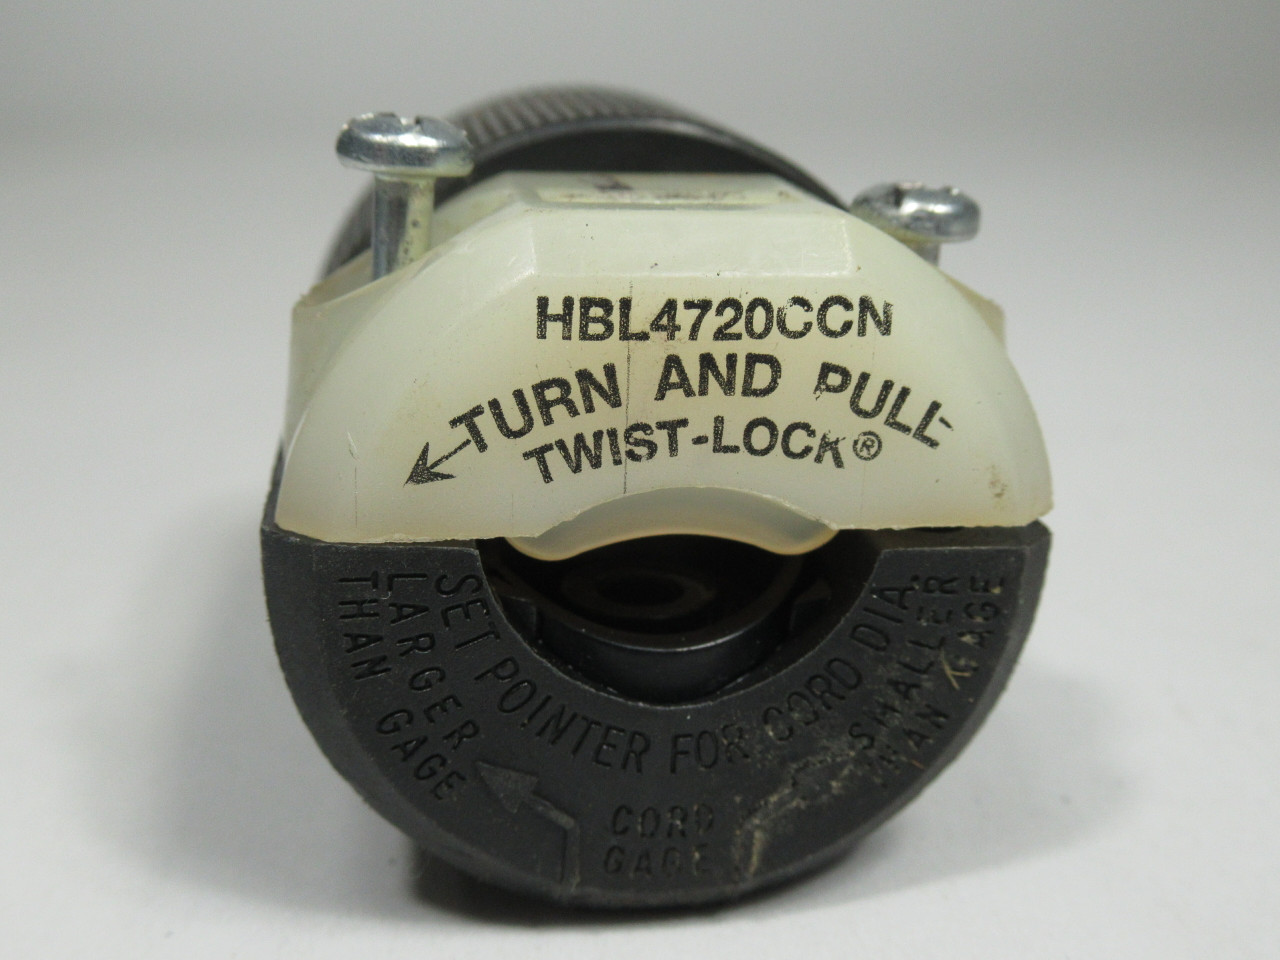 Hubbell HBL4720CCN Twist-Lock Plug 15A 125V 3 Wires 2 Poles USED